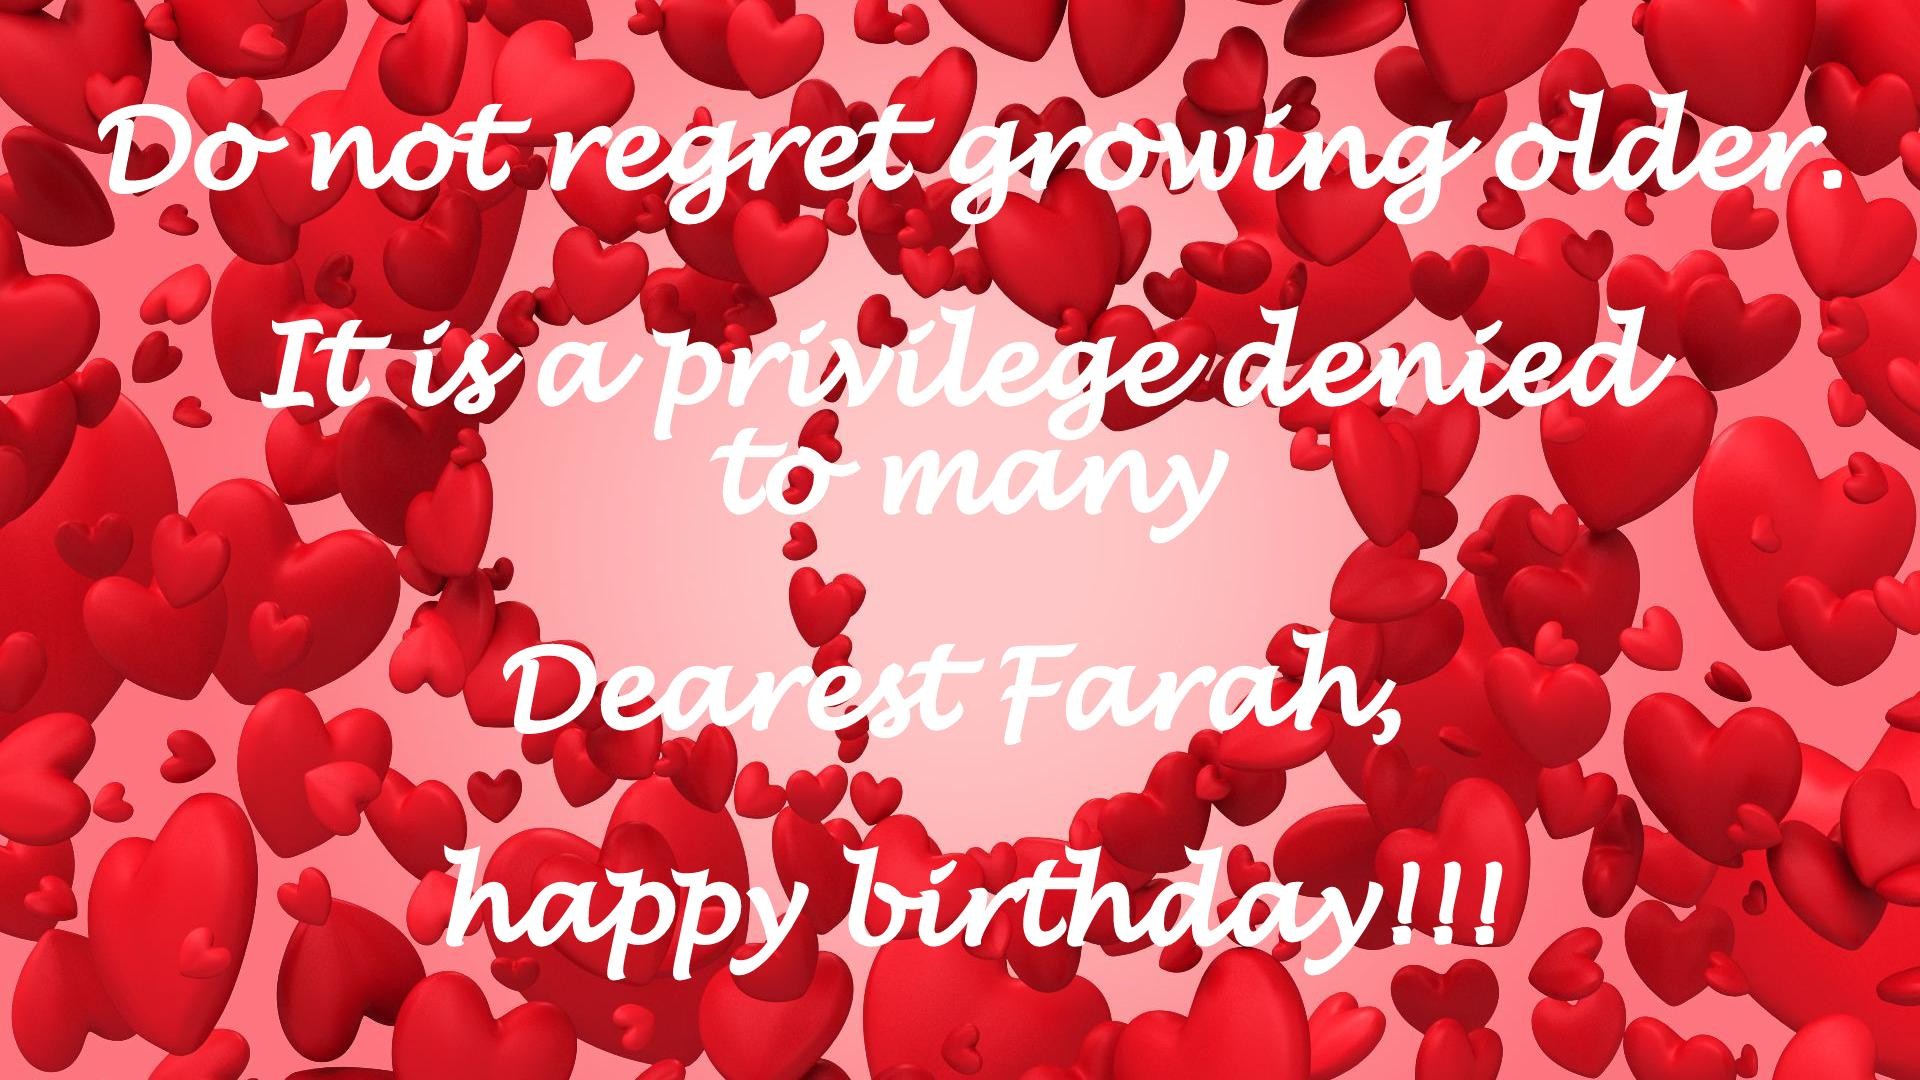 3d Name Wallpaper Farah Wallppapers Gallery - Happy Birthday Farah Wishes , HD Wallpaper & Backgrounds